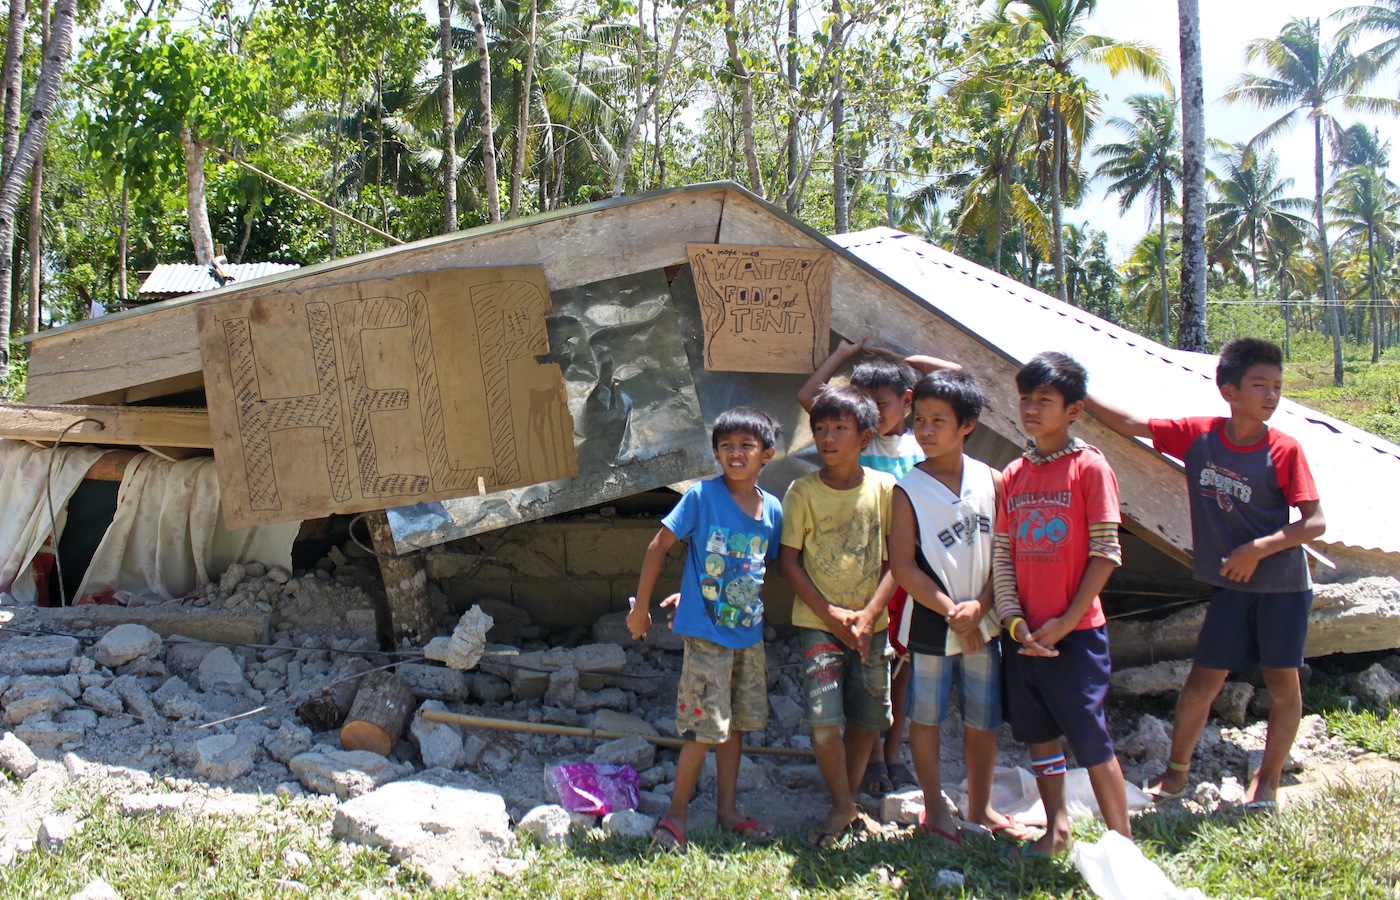 Children affected by the earthquake stand in front of a collapsed house in Bohol, Philippines. ©UNOCHA 2013/JAddawe